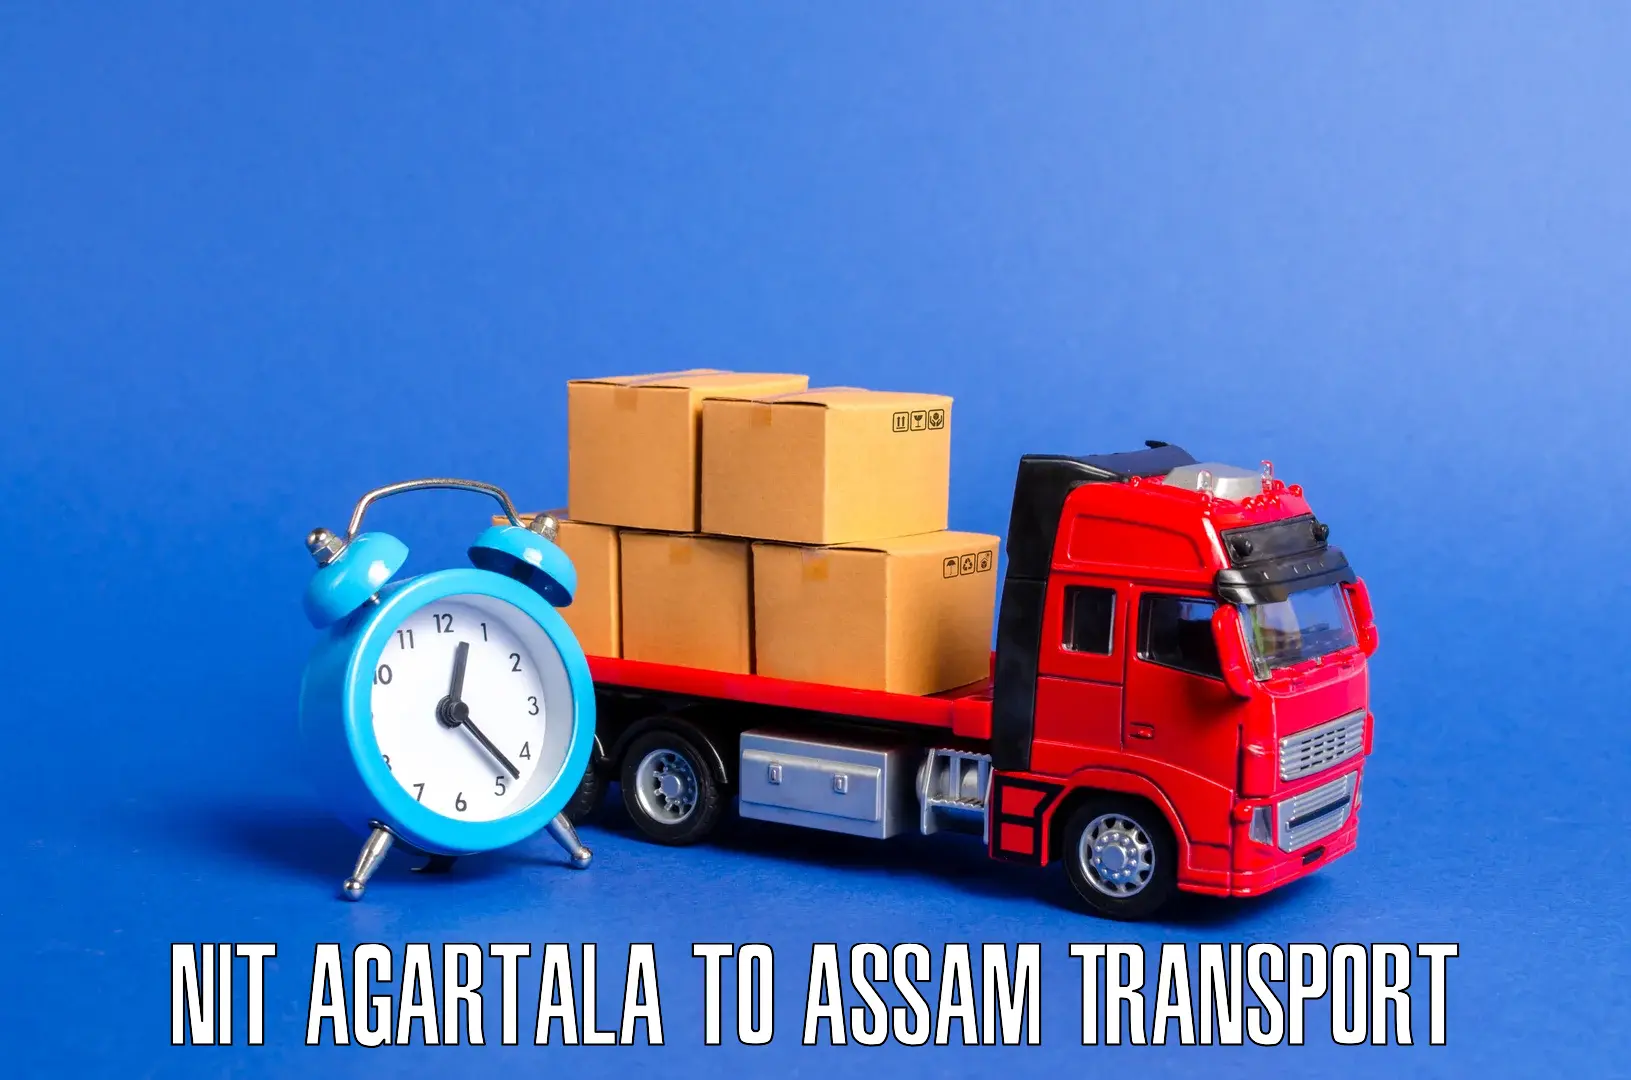 Container transport service NIT Agartala to Tengakhat